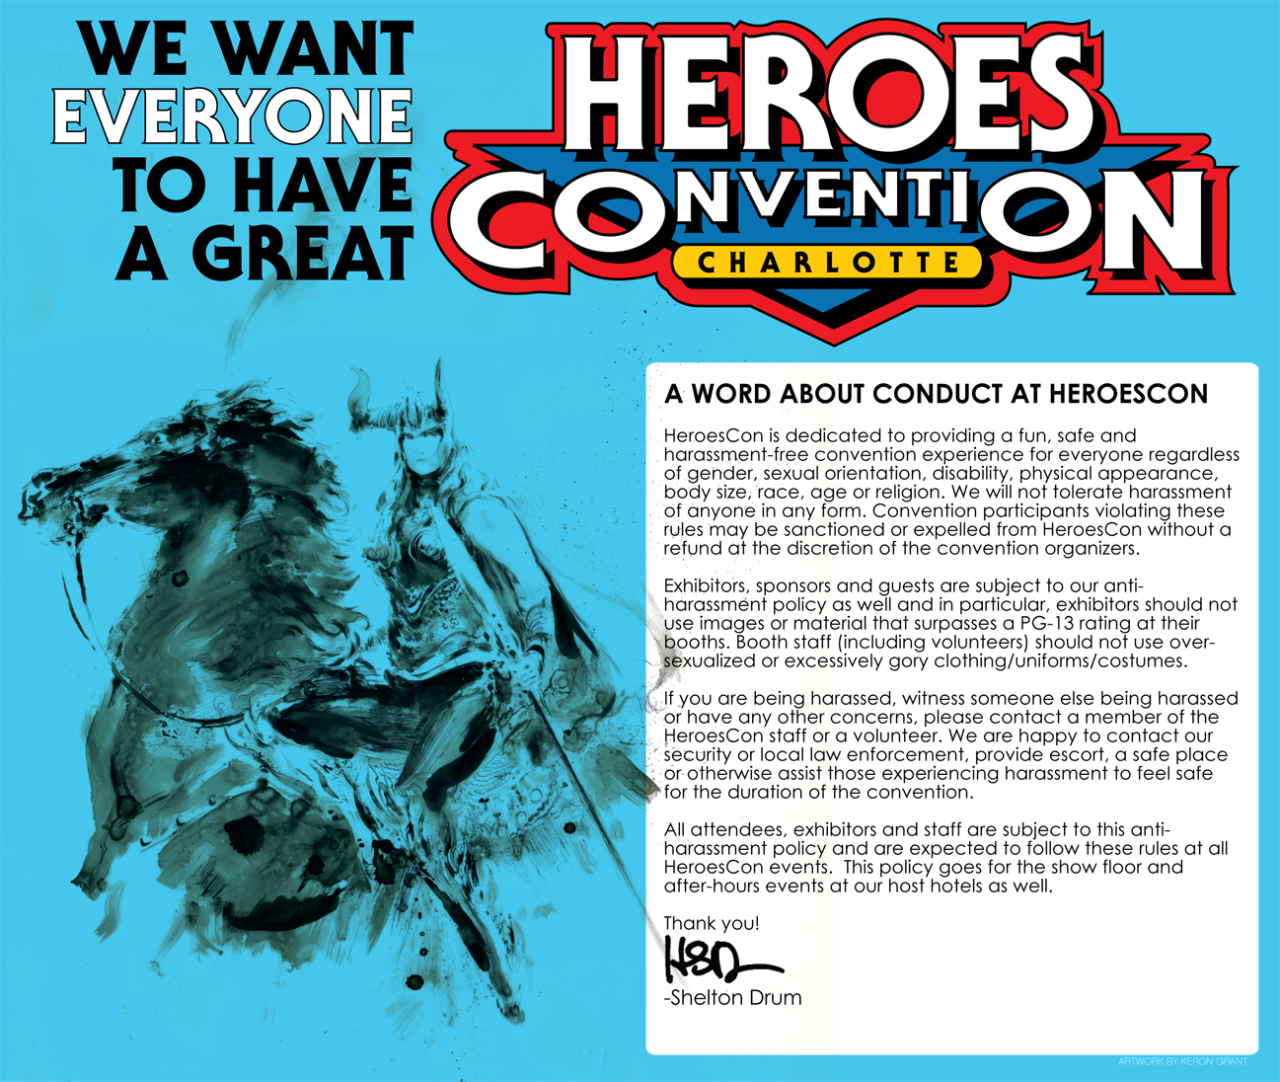 heroesonline:
“ A WORD ABOUT CONDUCT AT HEROESCON  HeroesCon is dedicated to providing a fun, safe and harassment-free convention experience for everyone regardless of gender, sexual orientation, disability, physical appearance, body size, race, age...